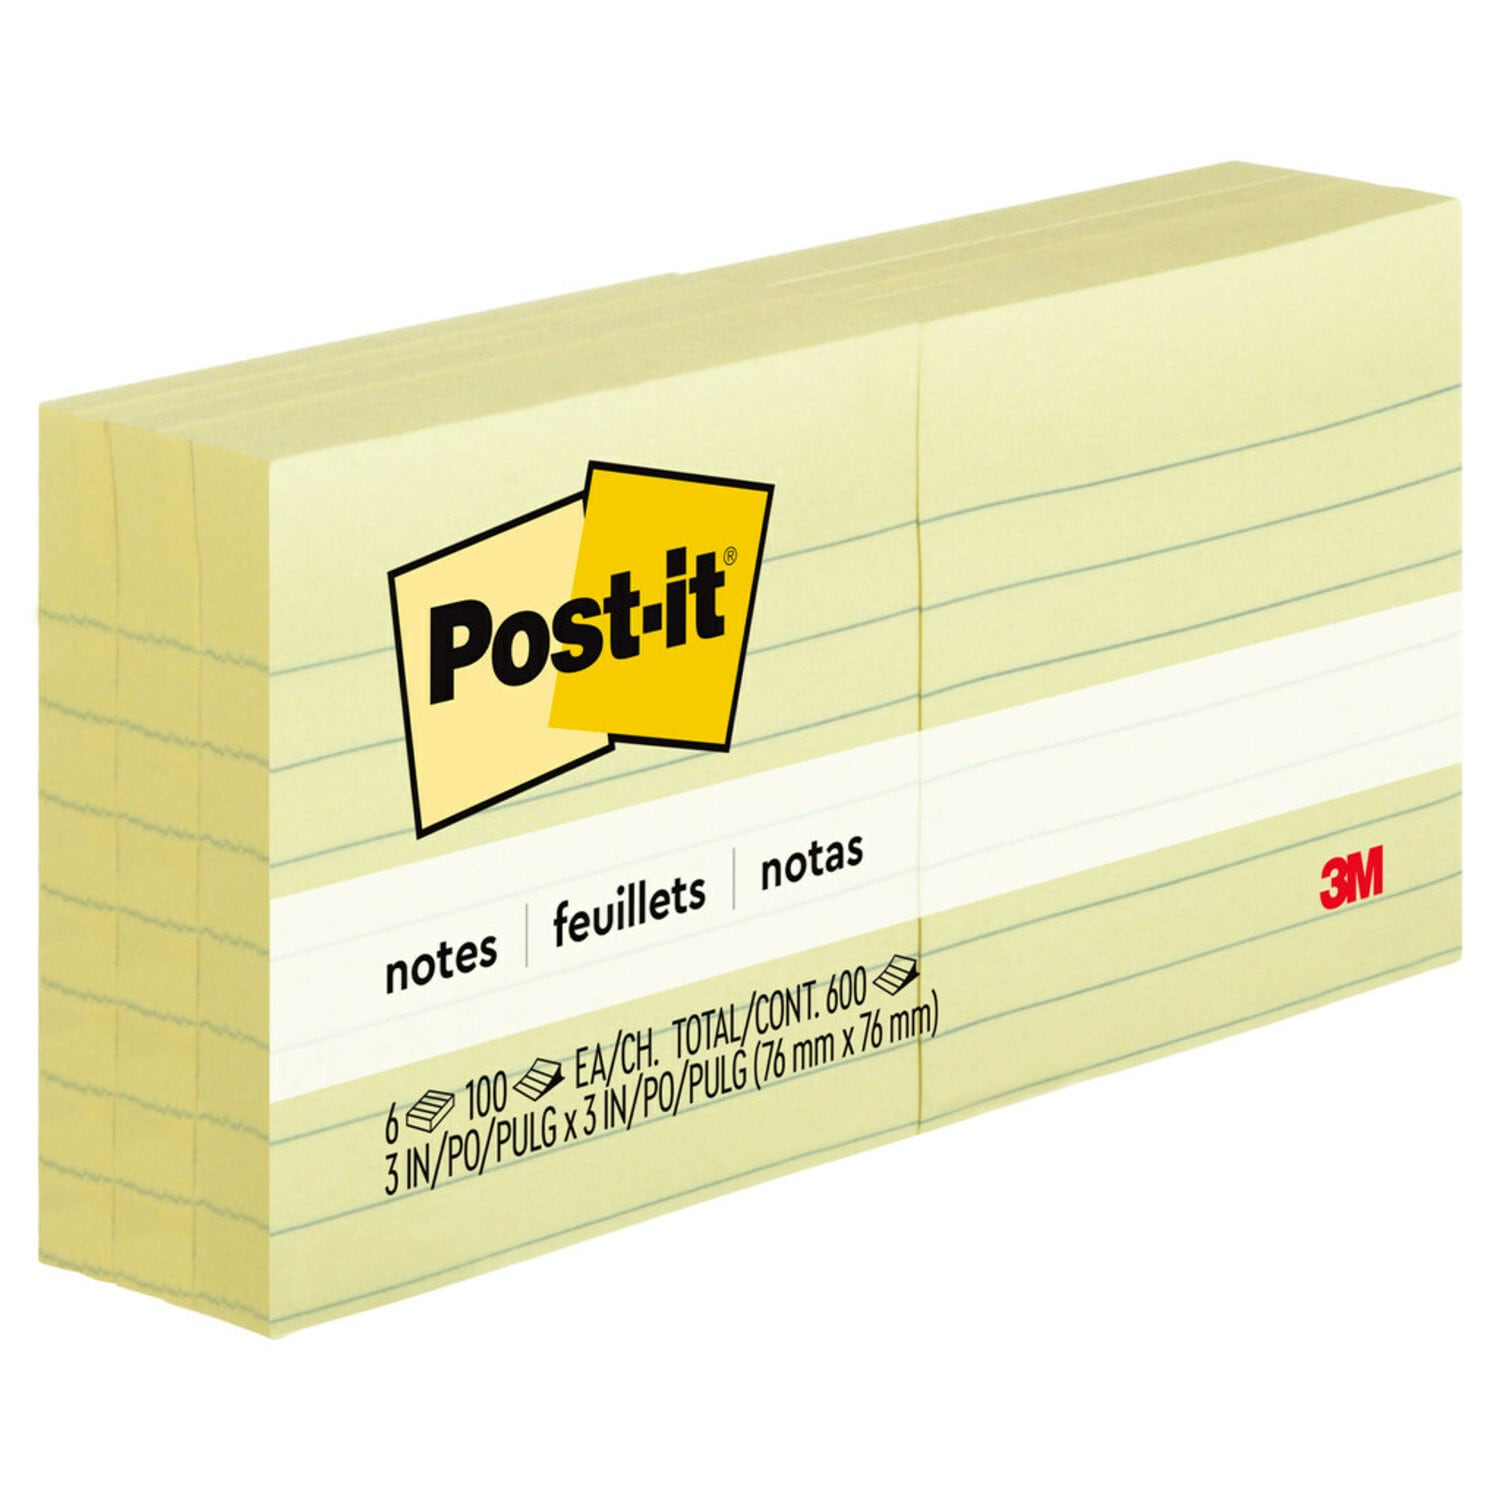 7100137927 - Post-it Notes 630-6PK 3 in x 3 in (7.62 cm x 7.62 cm) Canary Yellow,
Lined